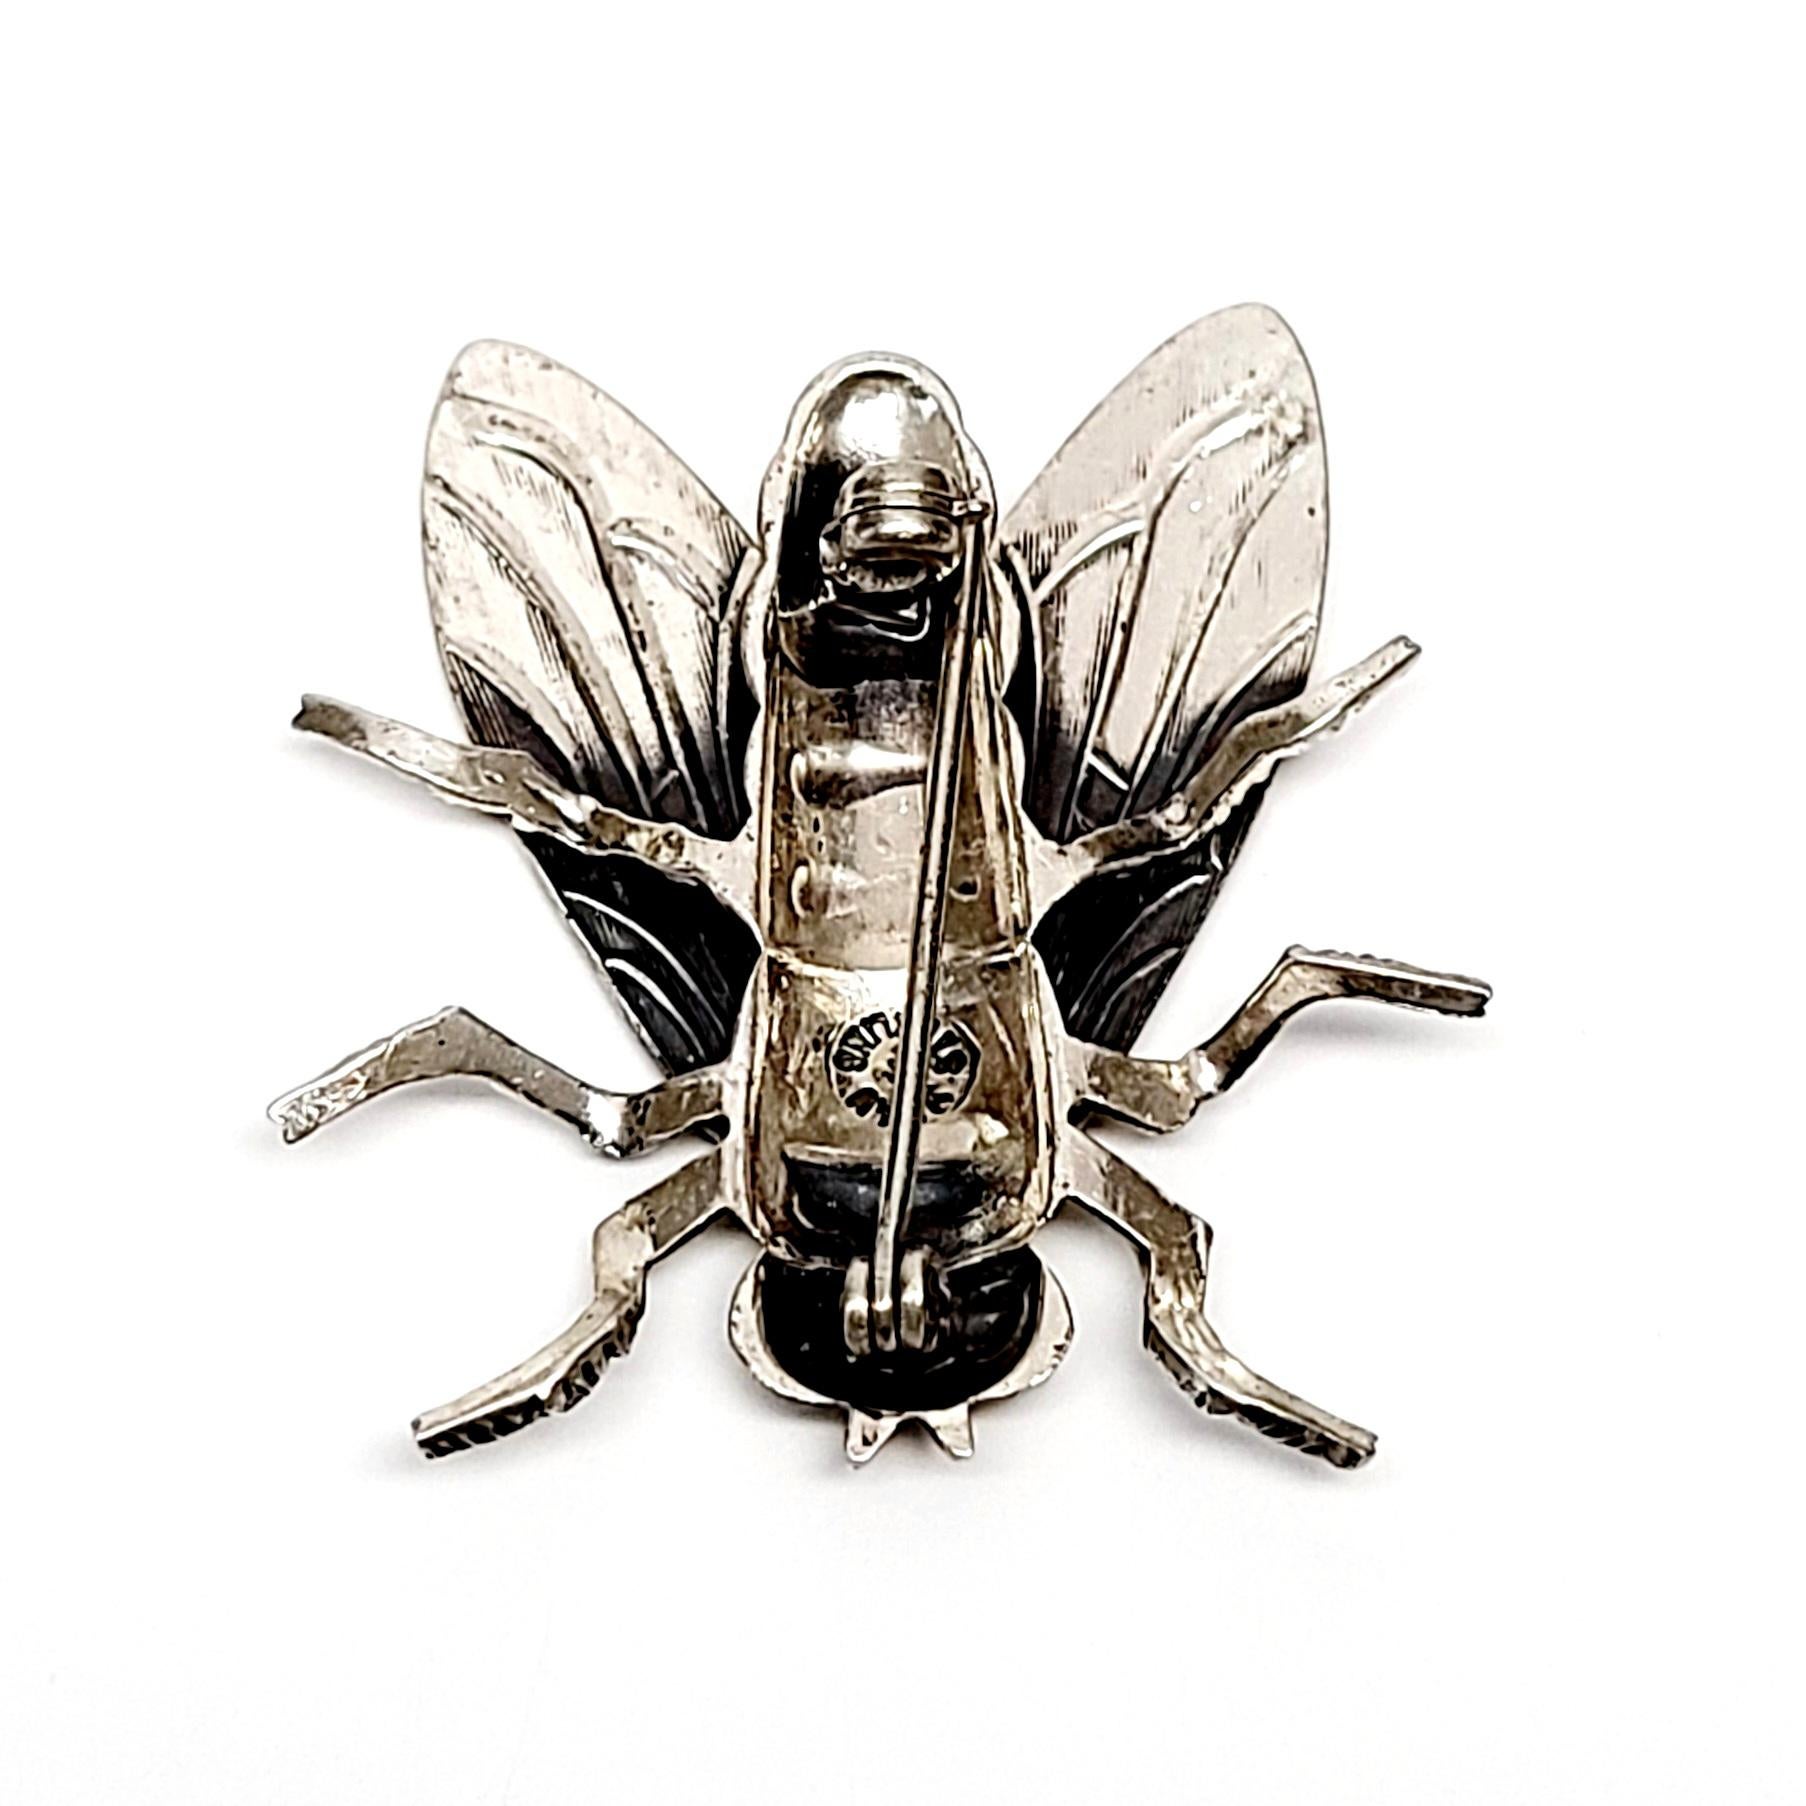 Vintage Beau sterling silver fly pin.

Beau and Beaucraft jewelry began in Providence, RI in 1947, they produced beautiful and unique fine silver pieces for over 50 years. This piece is a nice example of Beau's uniqueness, a highly detailed large